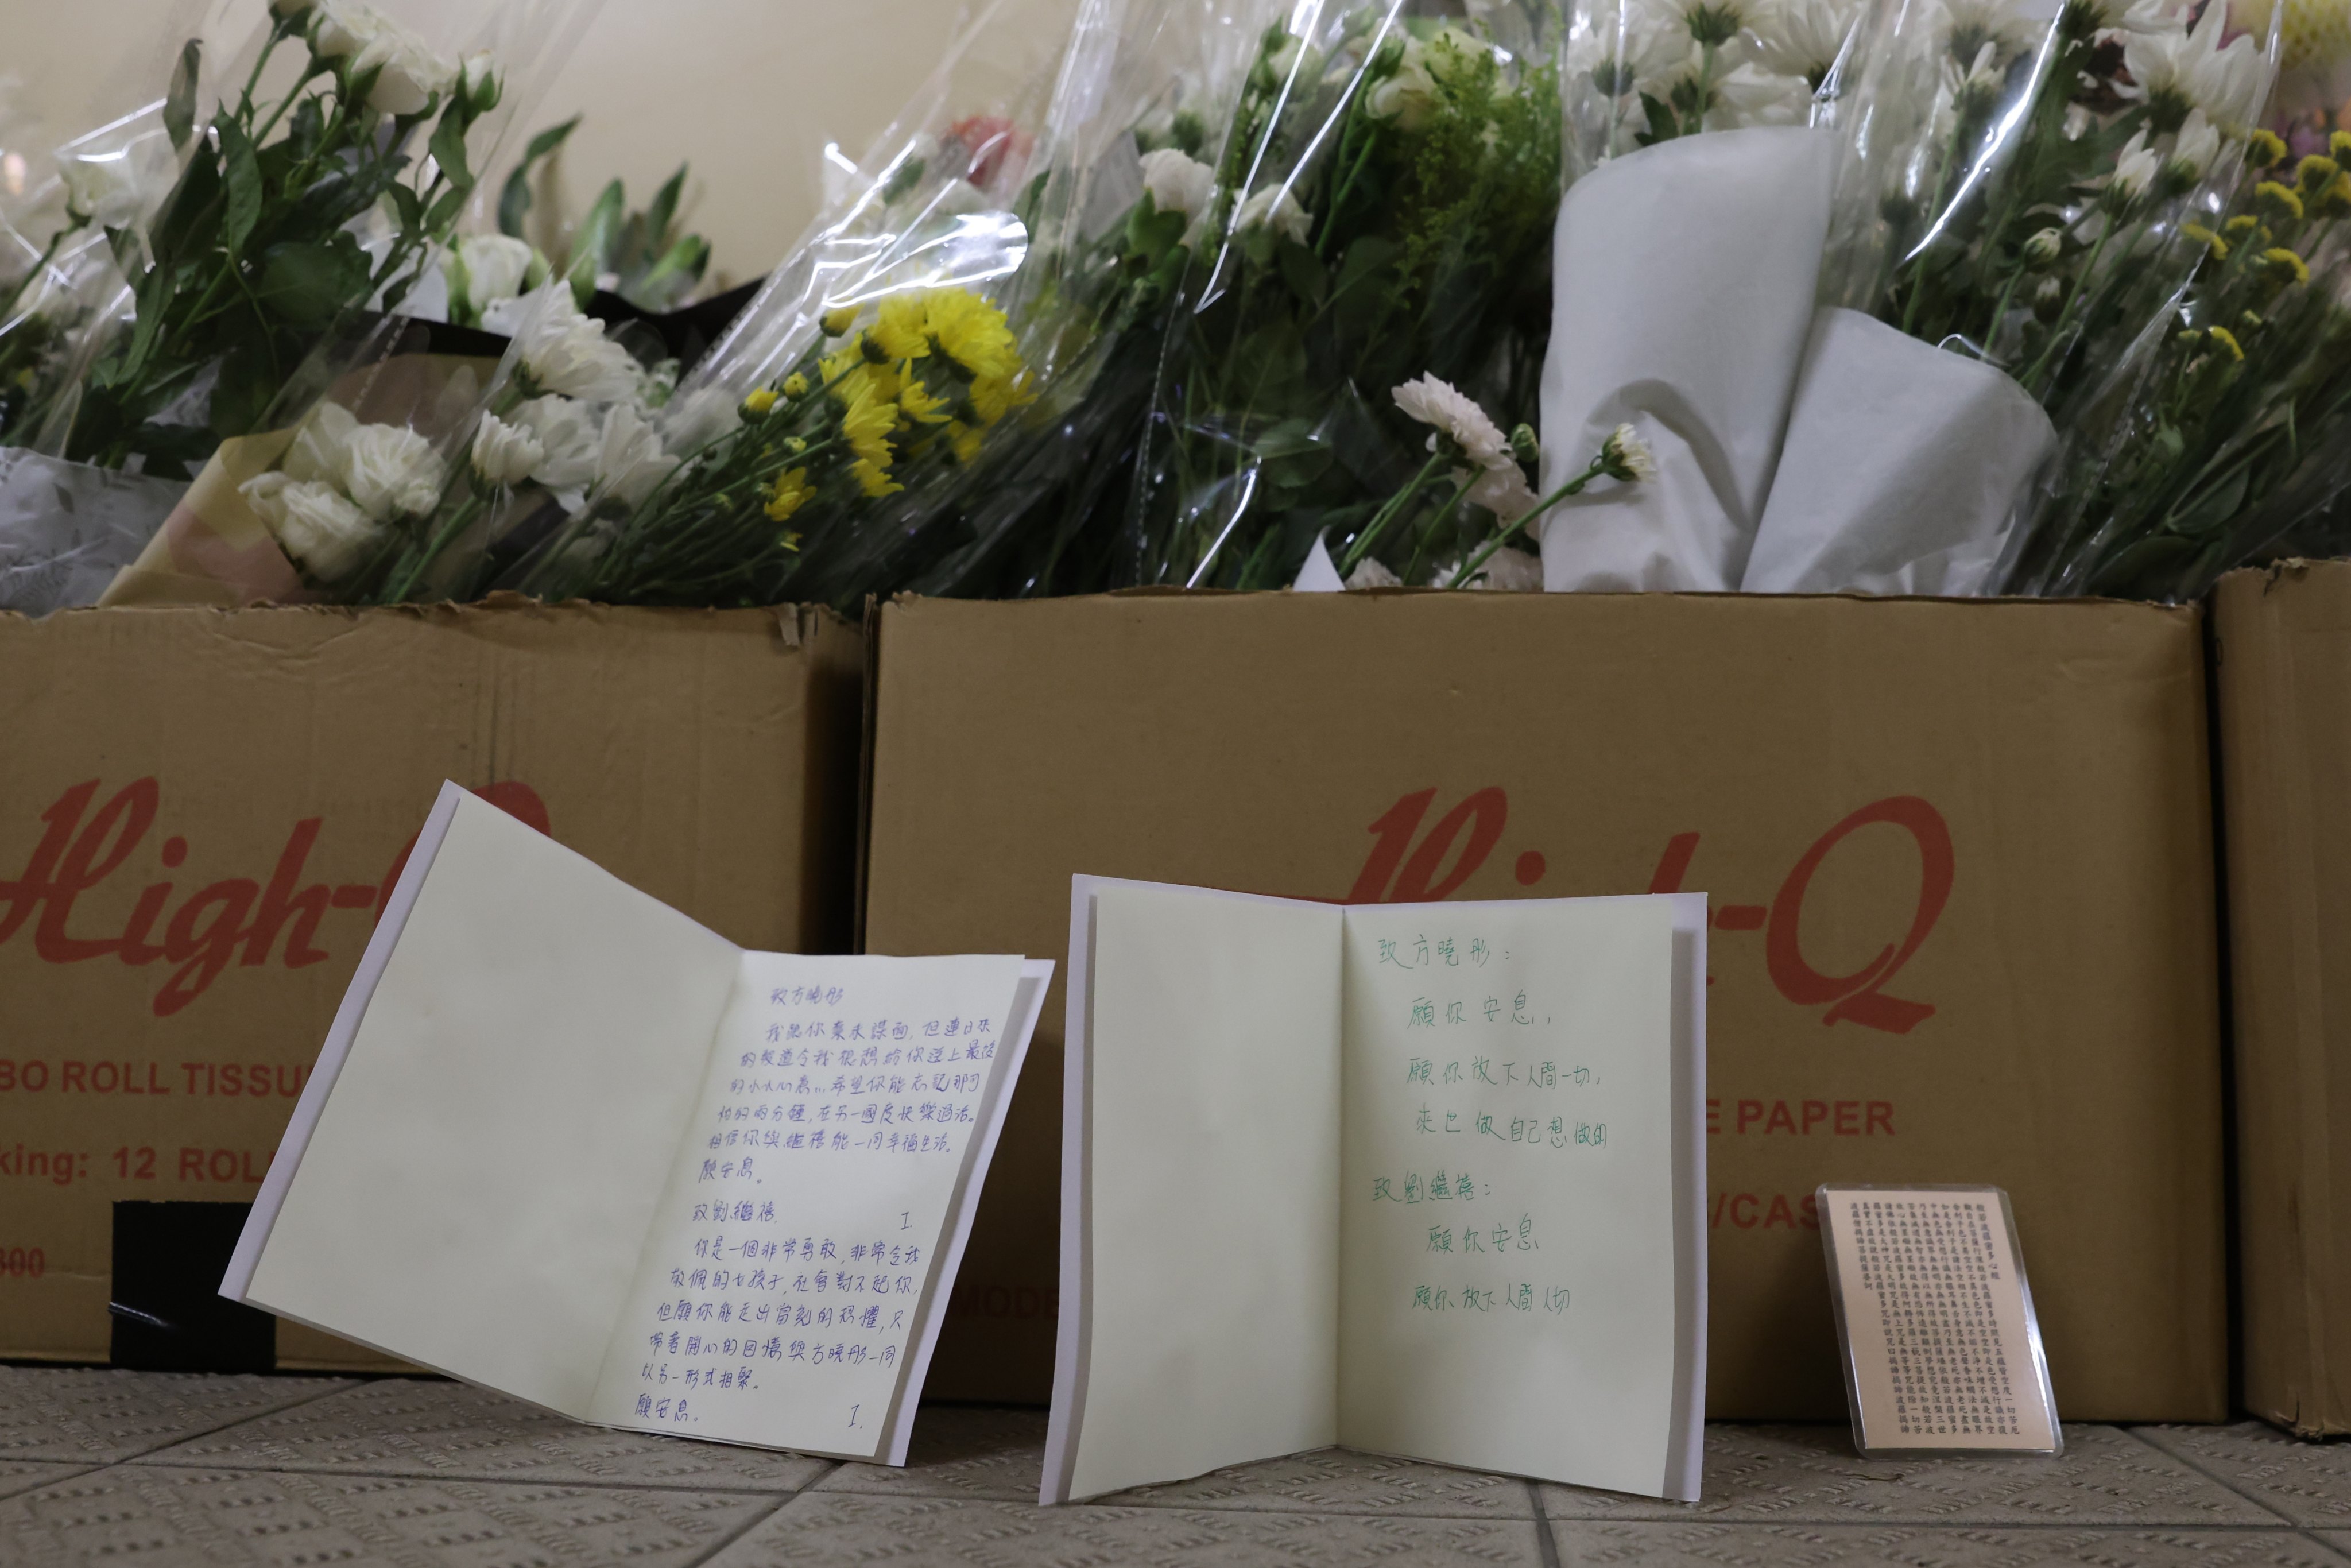 People place flowers and leave notes at the shopping mall where two women were killed on June 2 by a mentally disturbed man. Photo: May Tse